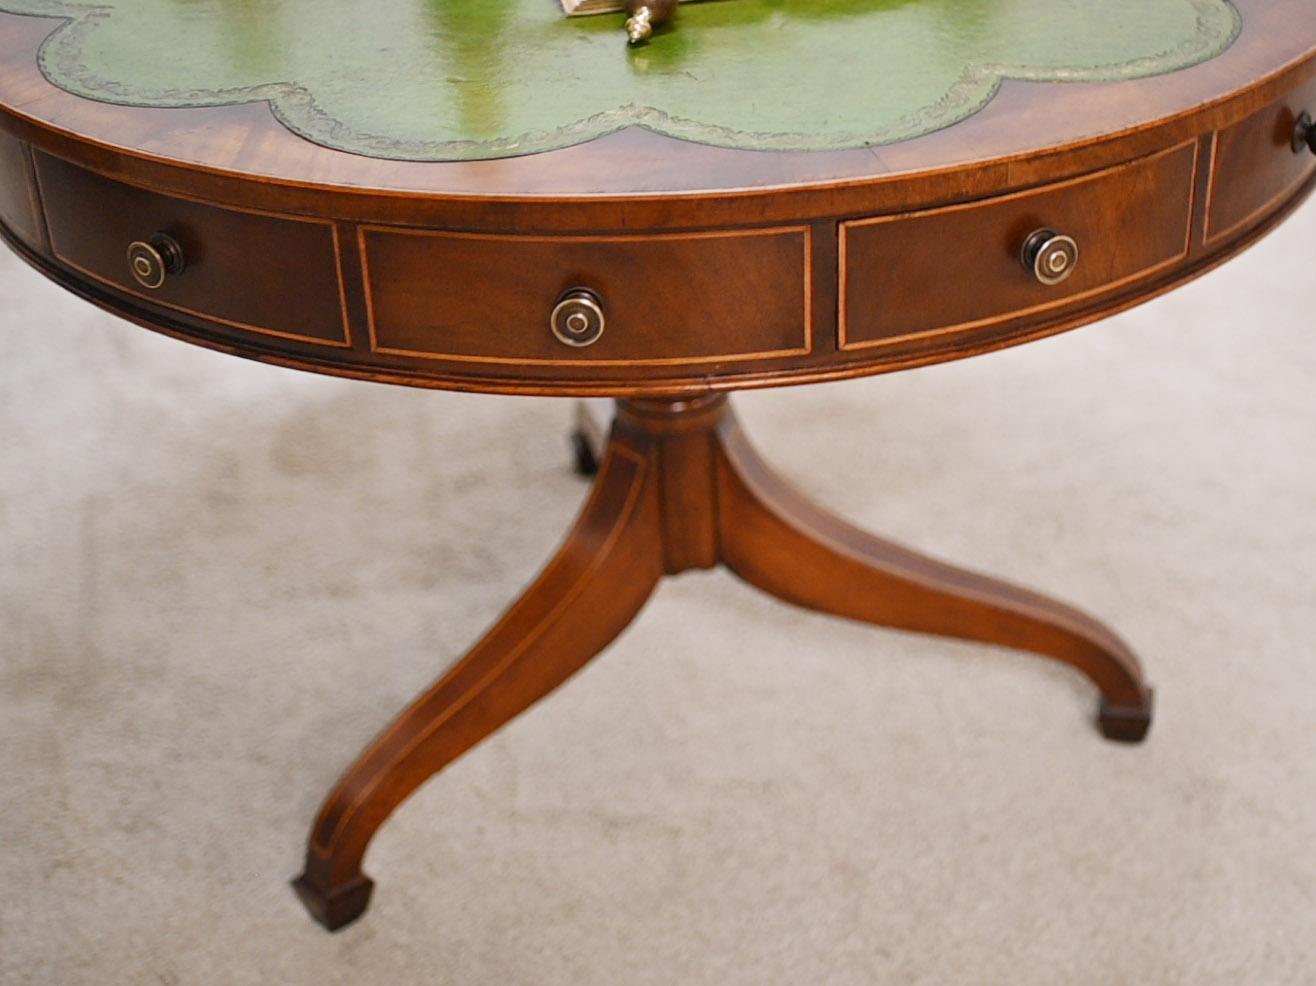 A circular Regency style drum table in mahogany with a tooled green leather scalloped top
Love how the leather sits on the table, almost like a clover afffect
The drawers each have marquetry inlay in satinwood on the edges
All with brass knob